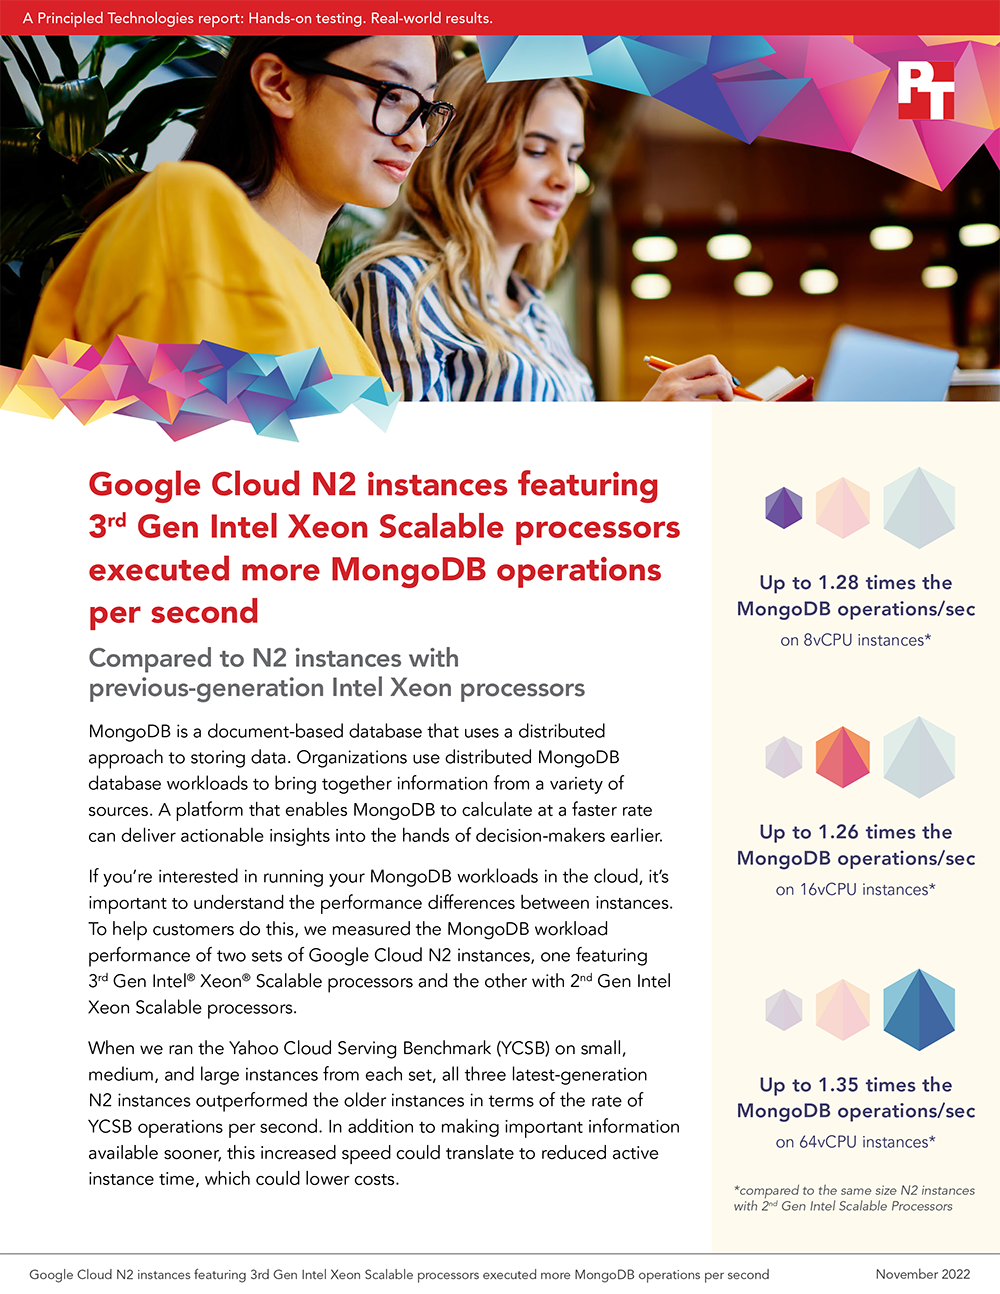  Google Cloud N2 instances featuring 3rd Gen Intel Xeon Scalable processors executed more MongoDB operations per second